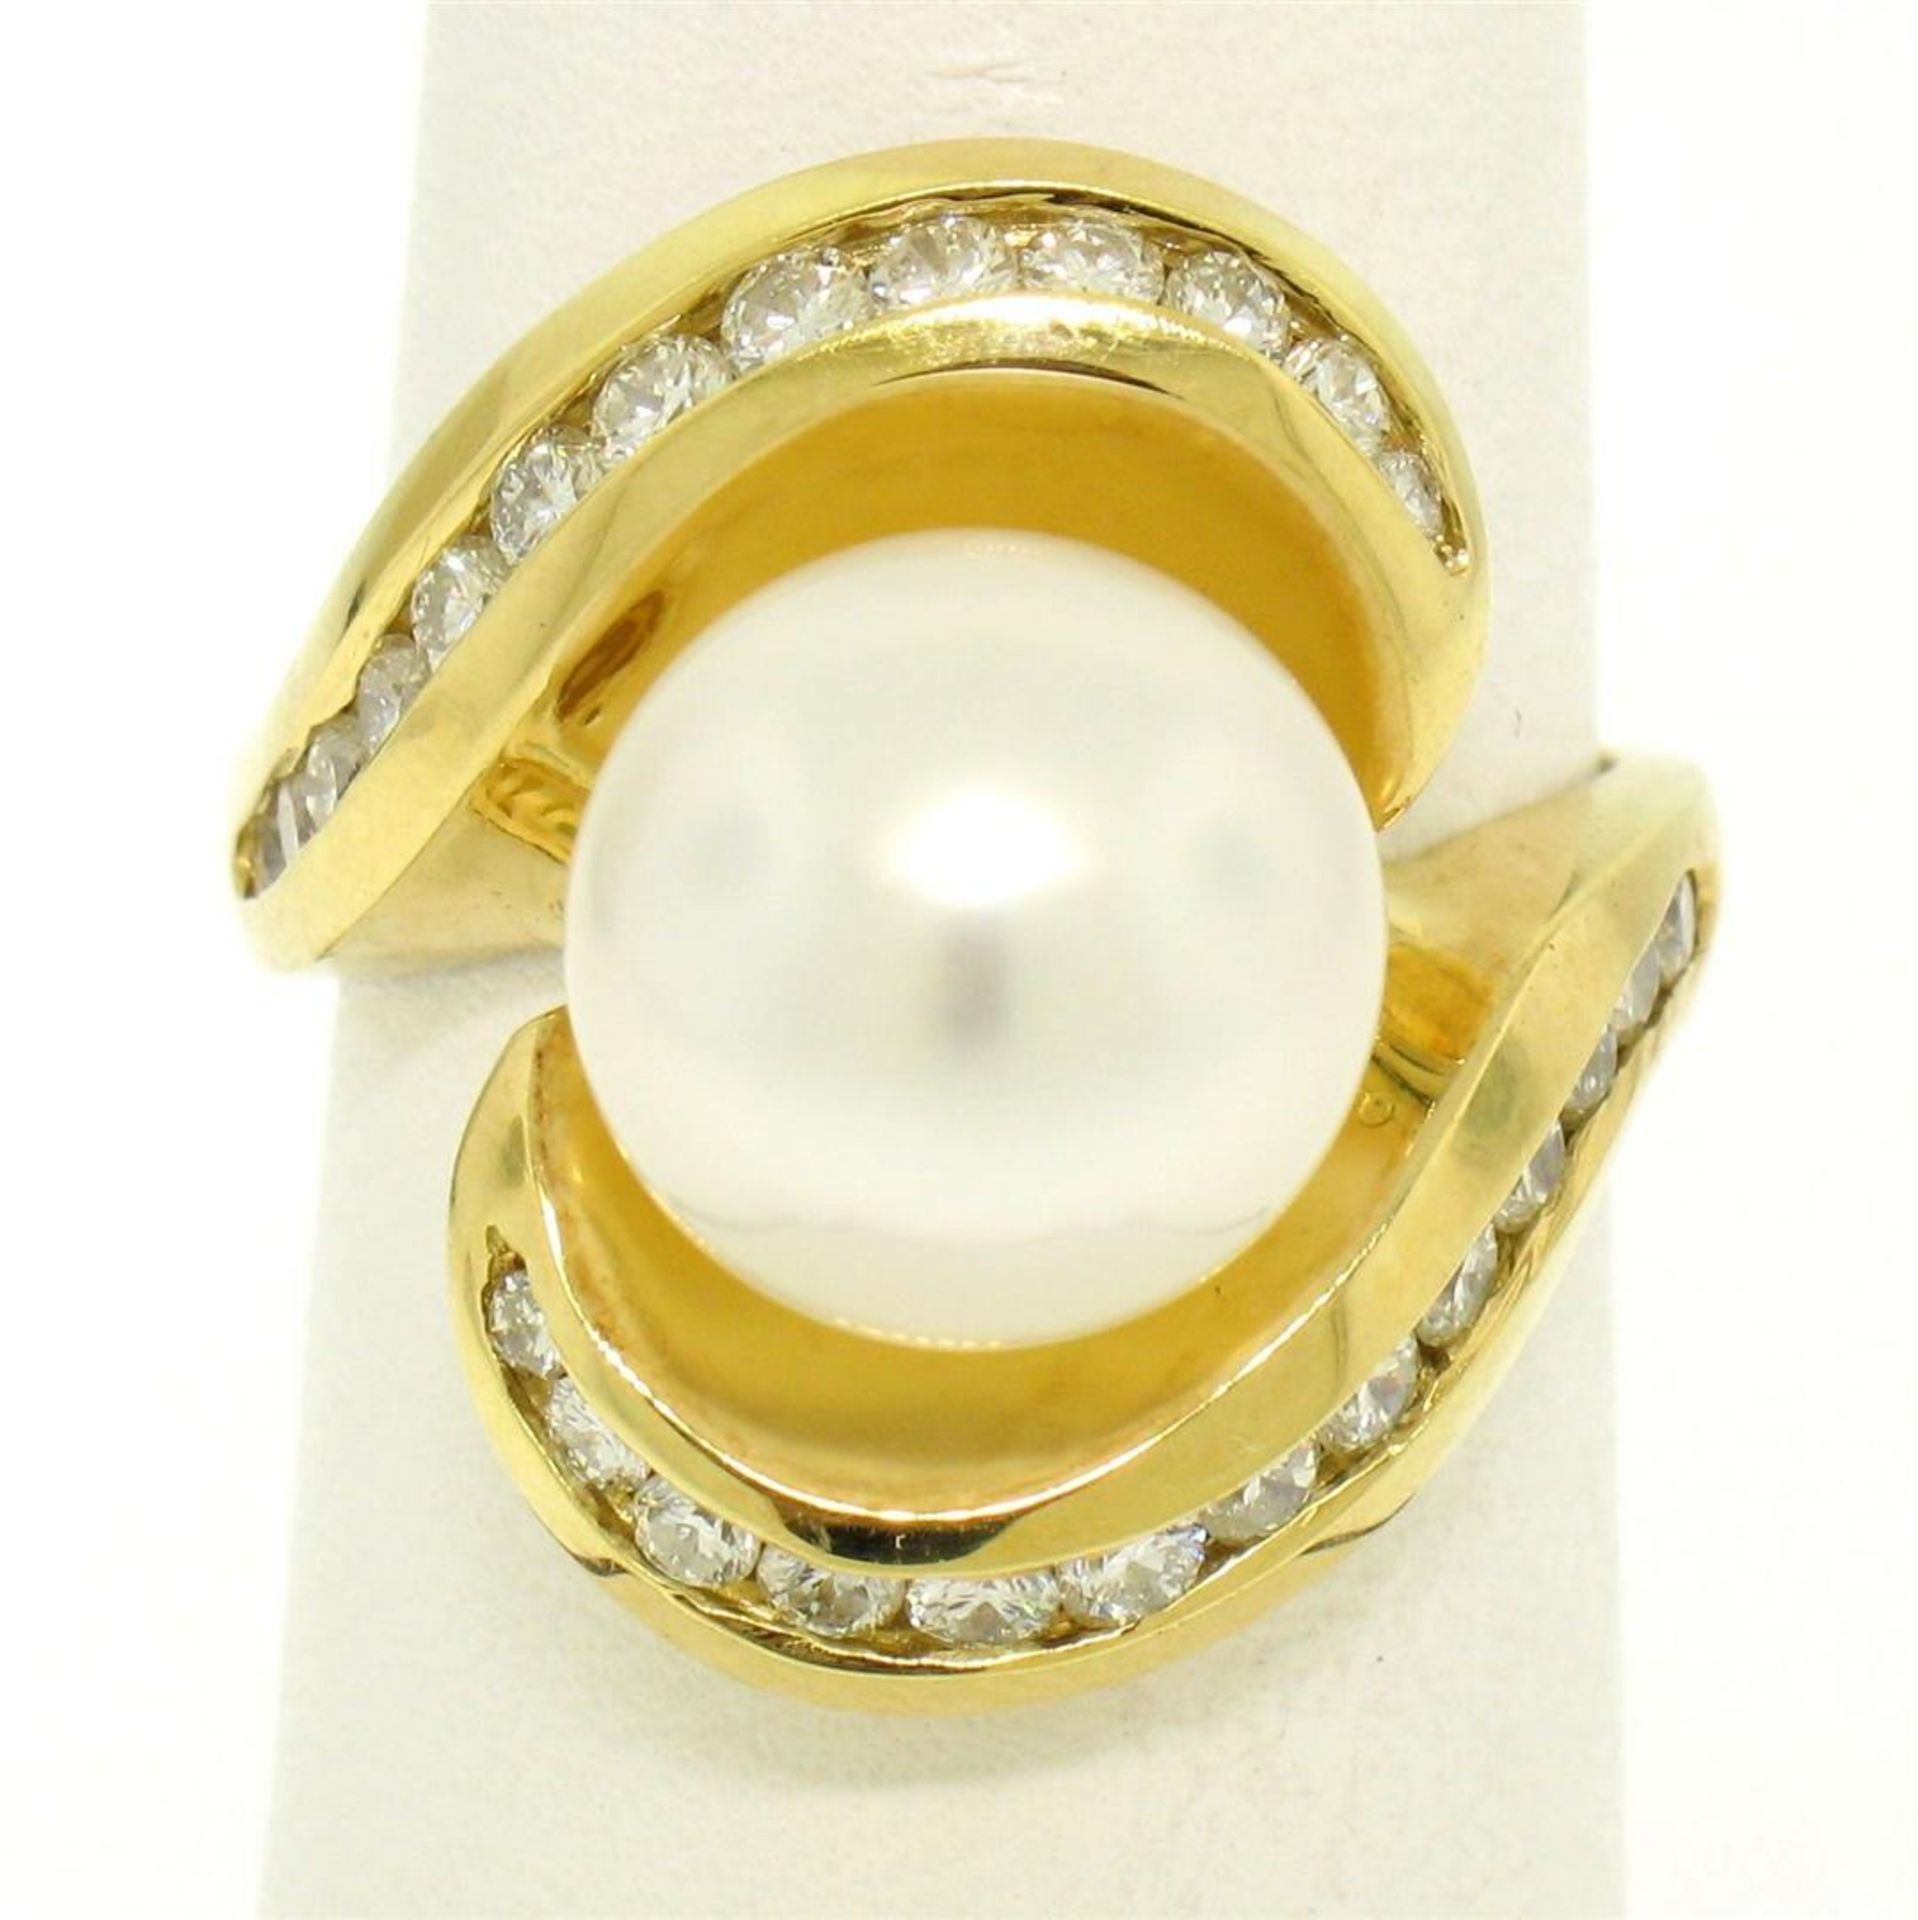 Large 18k Yellow Gold 10.6mm Round White Pearl Solitaire & Diamond Cocktail Ring - Image 4 of 8